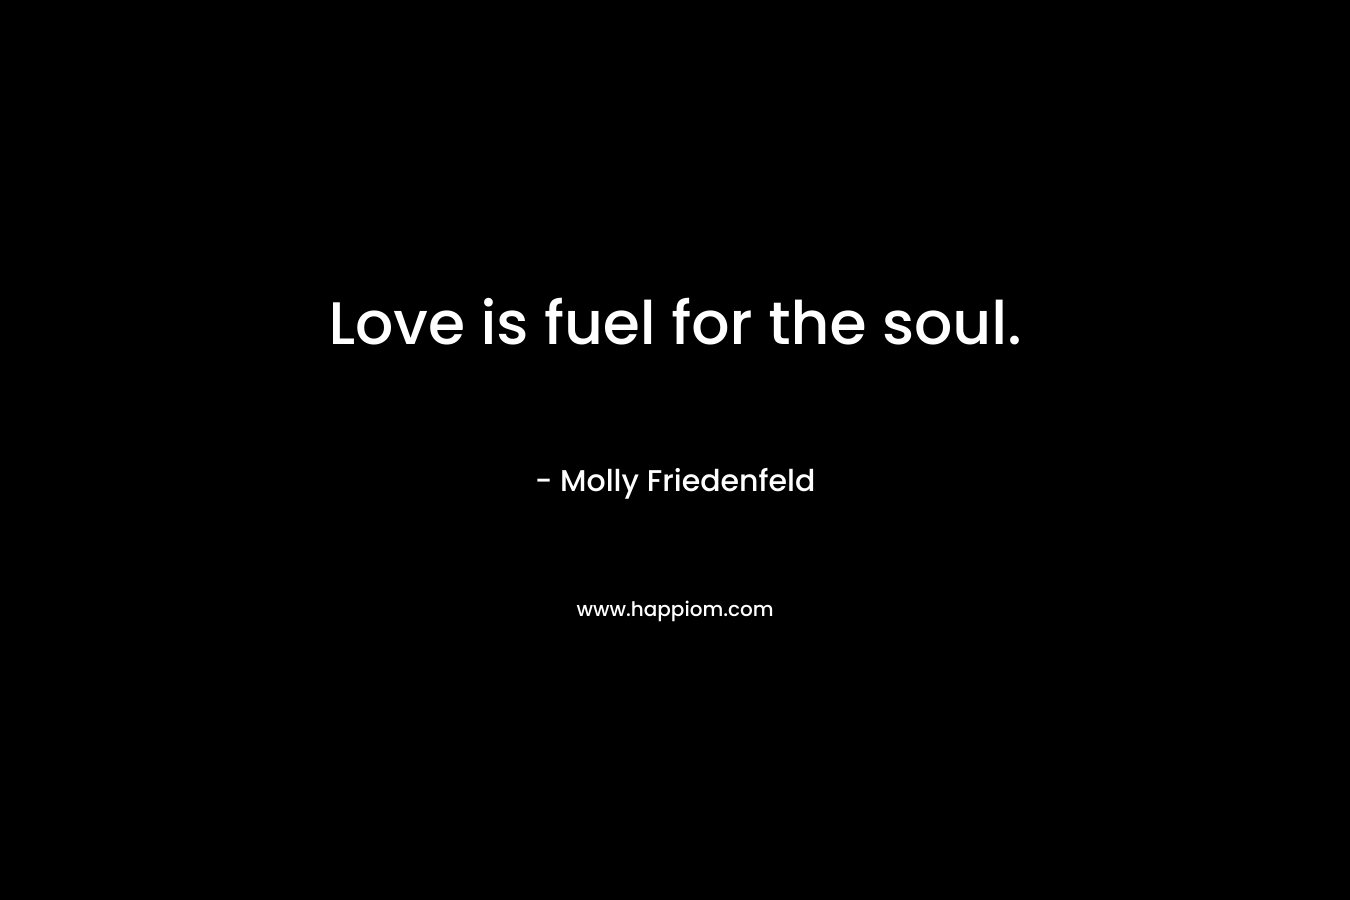 Love is fuel for the soul.